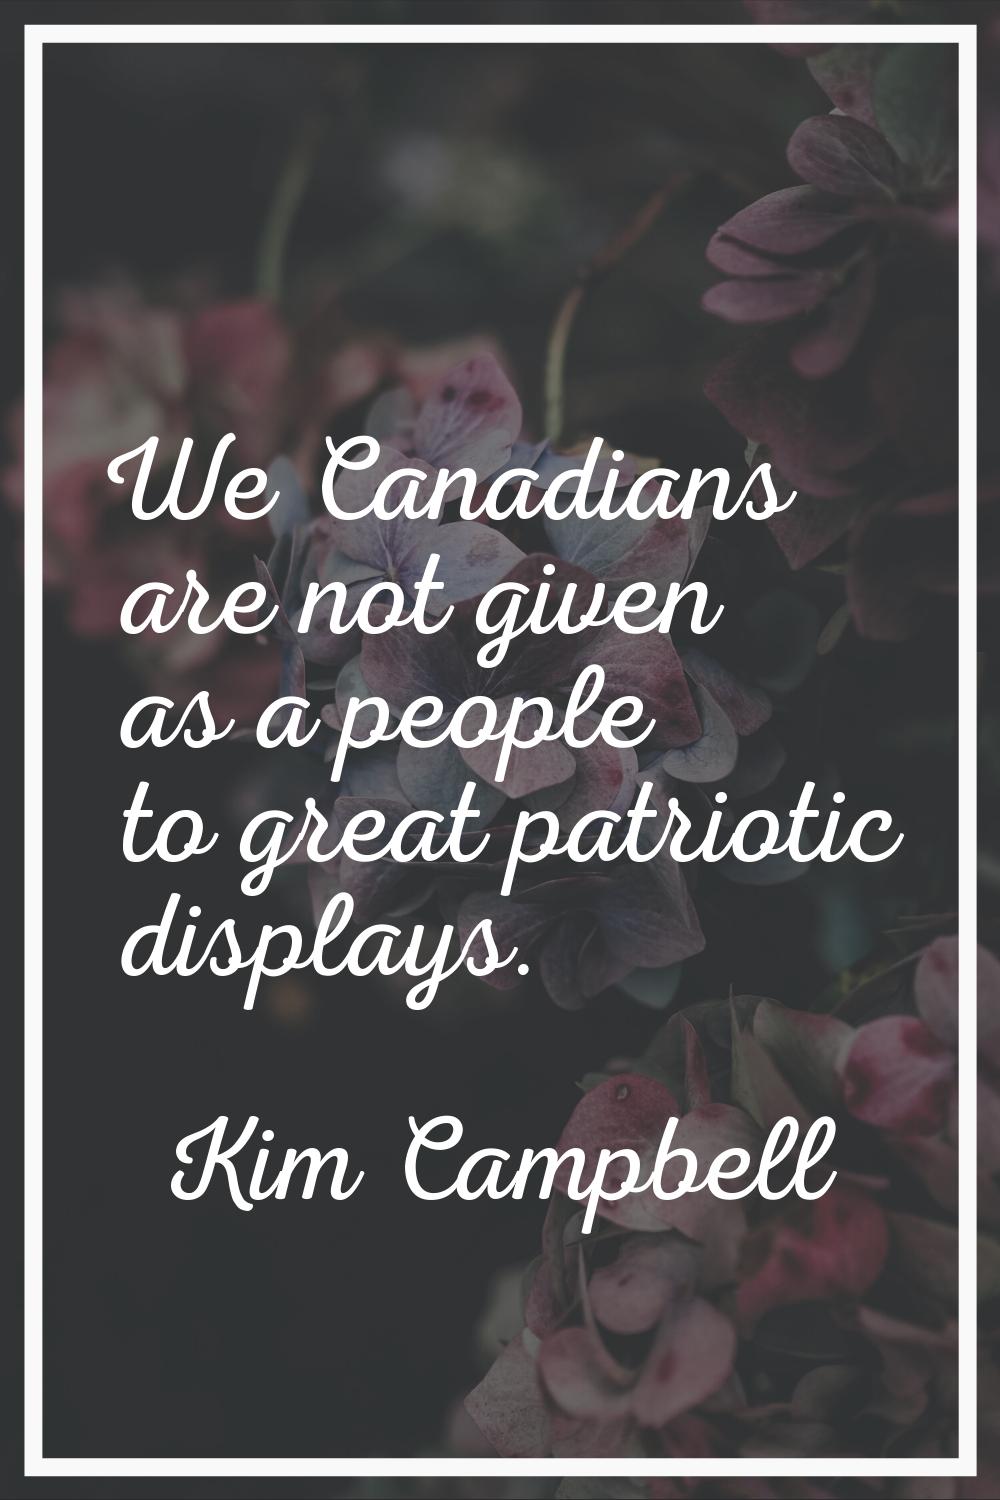 We Canadians are not given as a people to great patriotic displays.